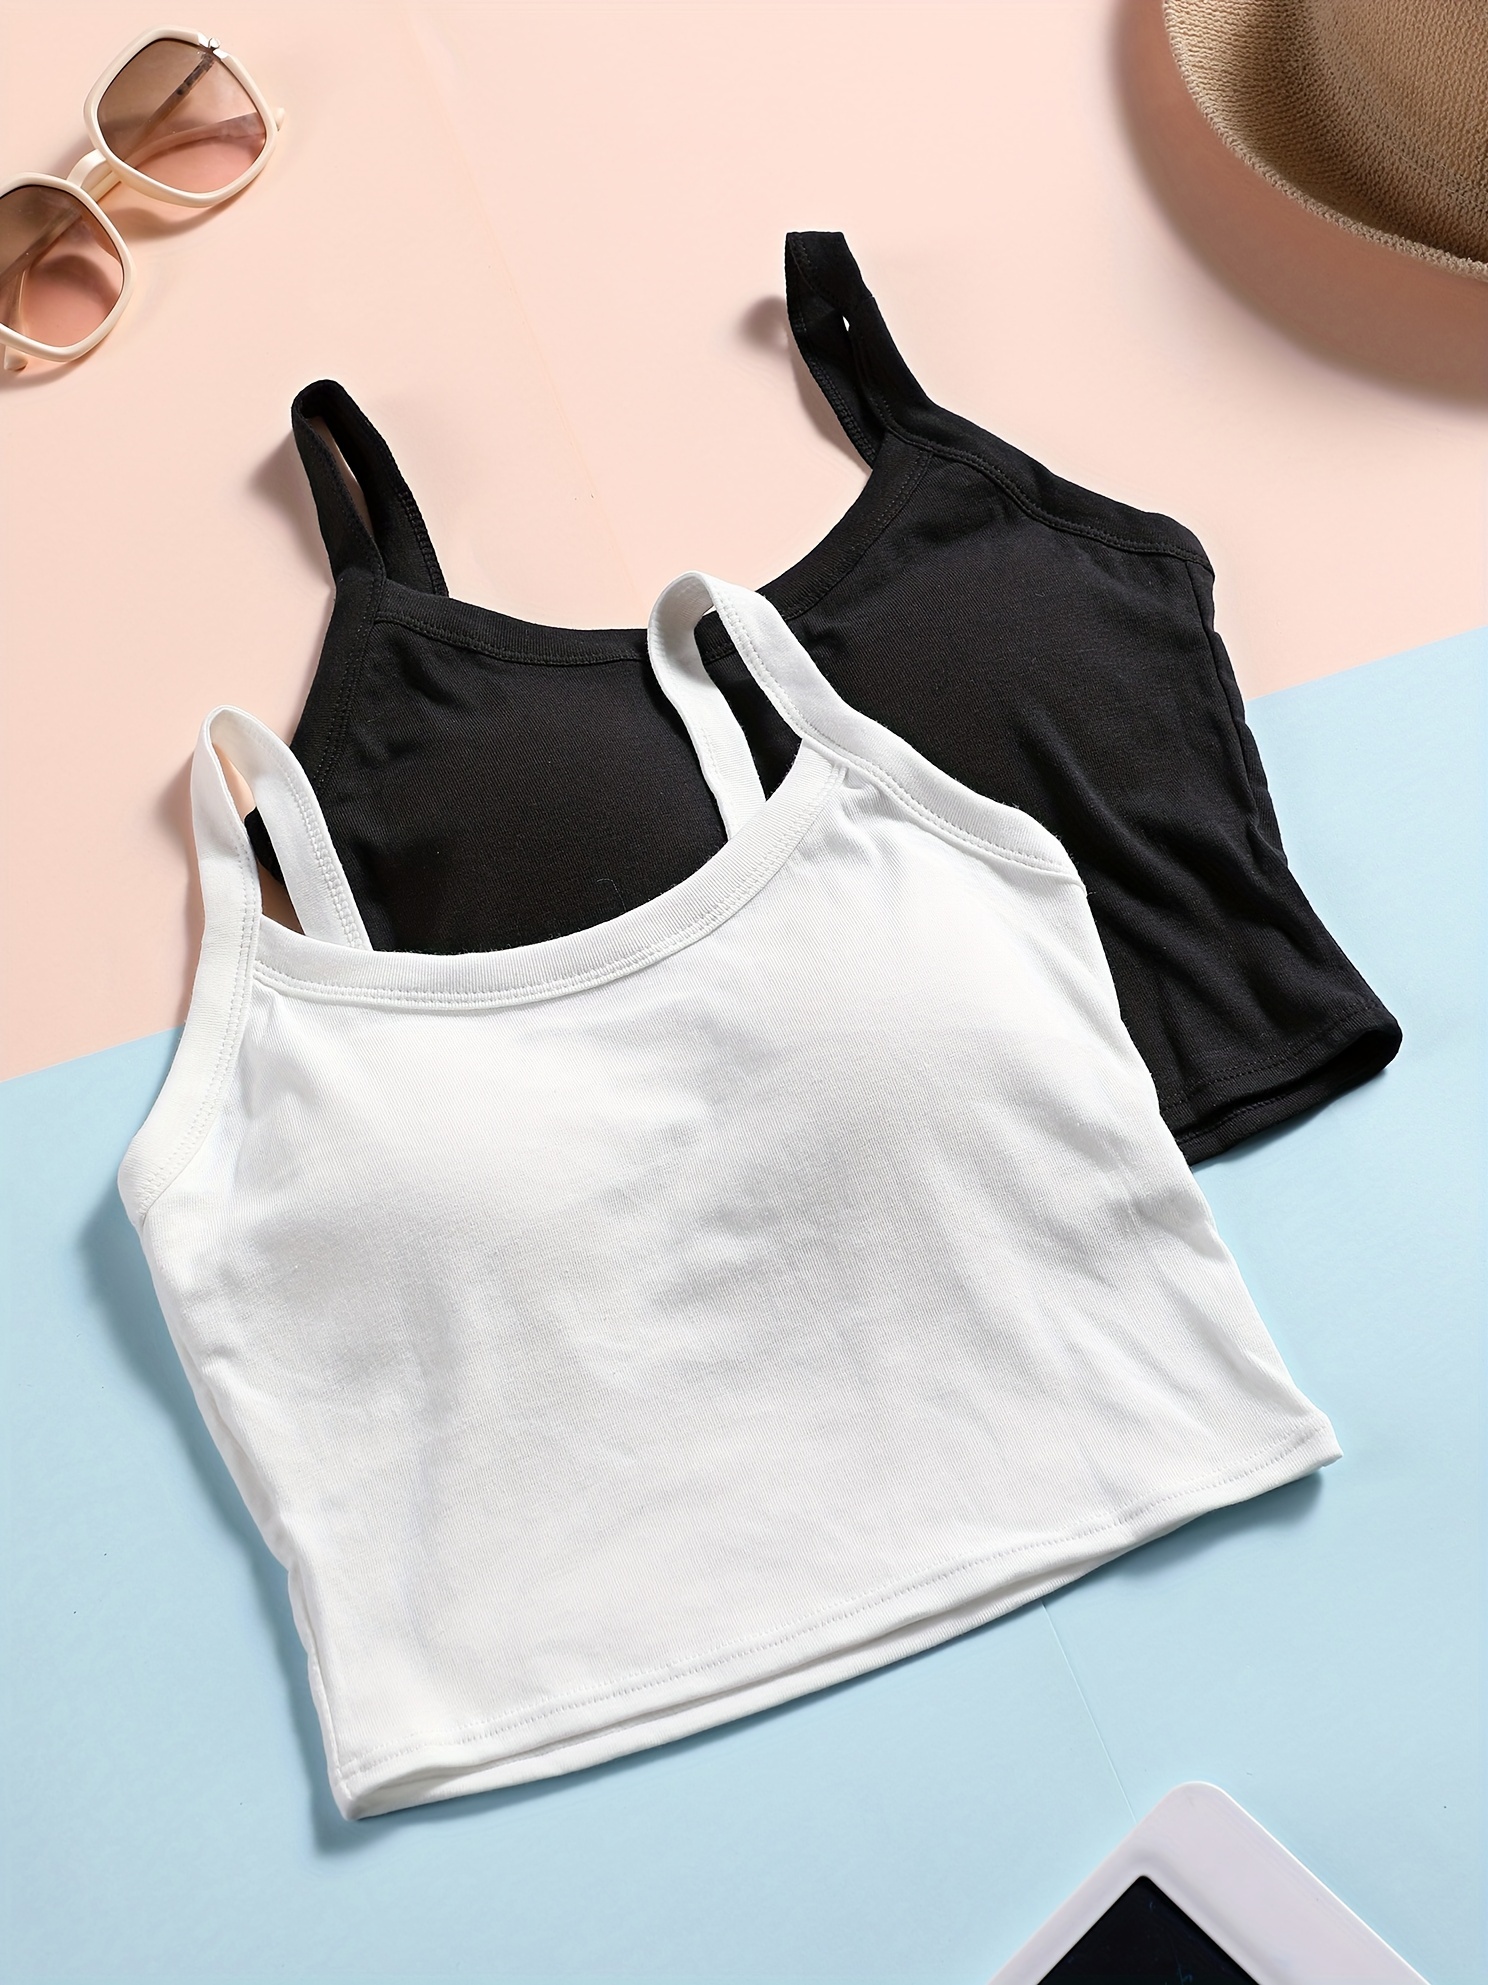 Women's V Neck Spaghetti Strap Cami Padded Crop Tank Top with Built in Bra  Casual Cotton Yoga Sports Bralette 